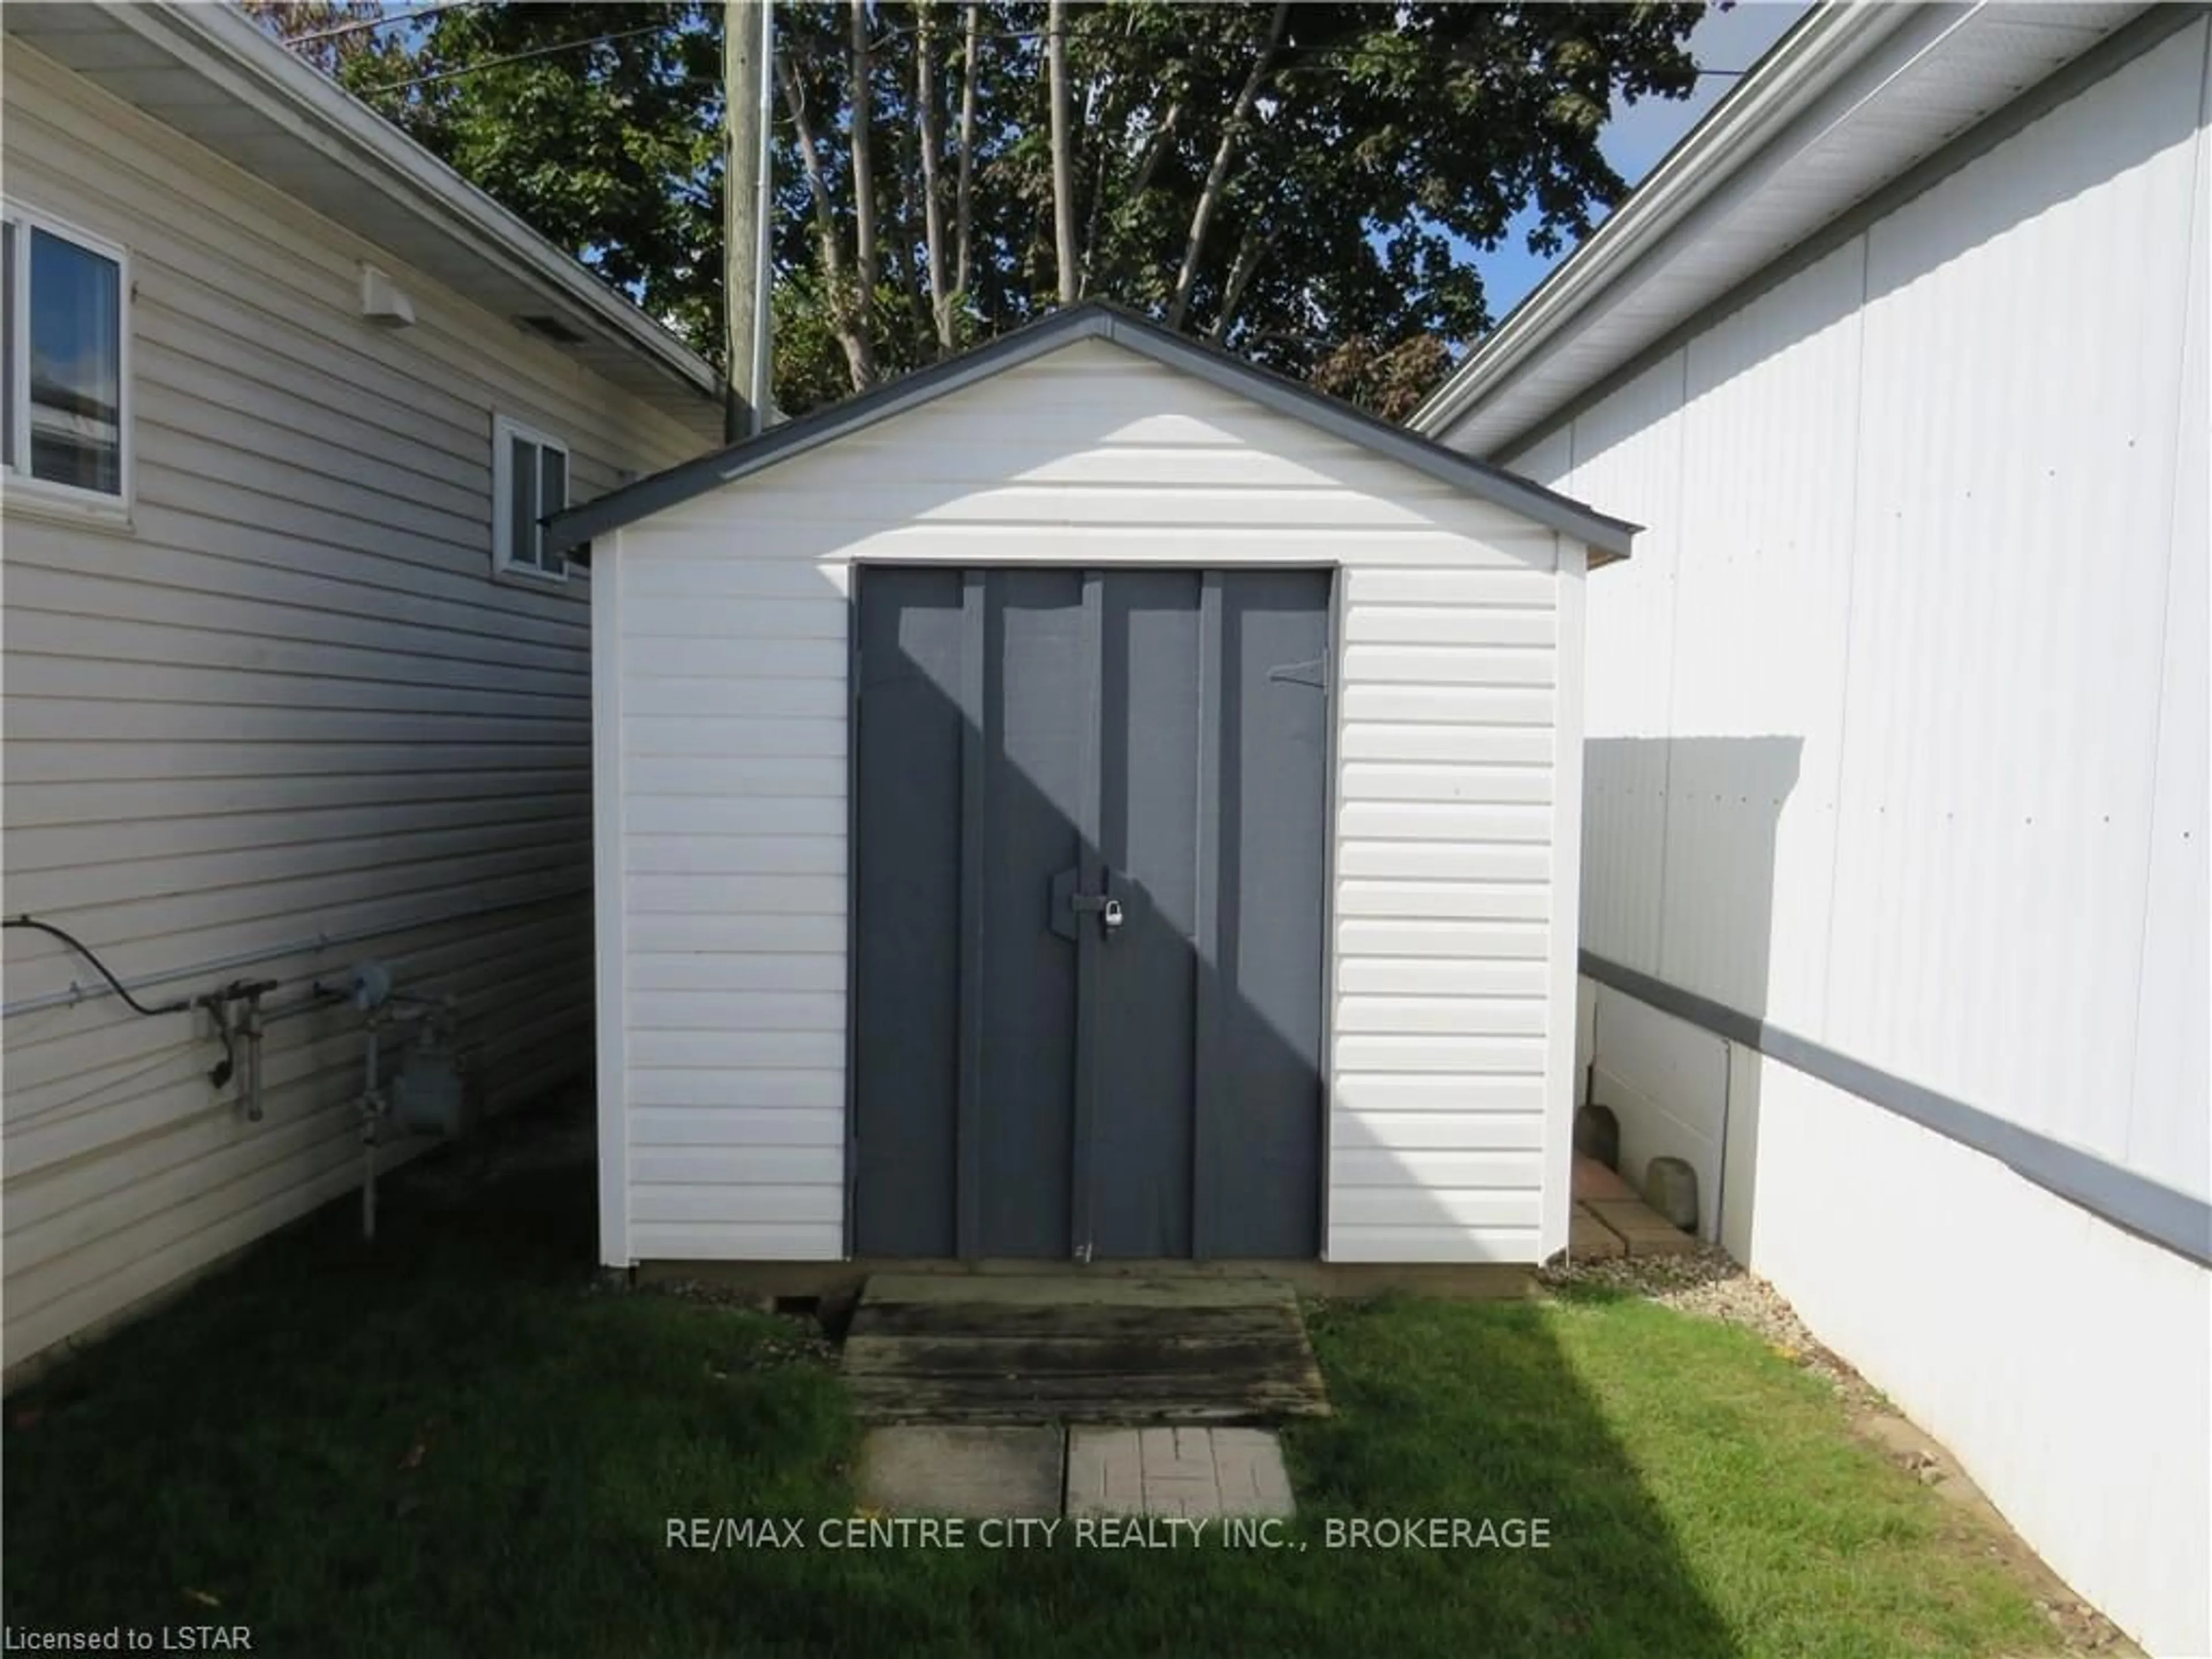 Shed for 198 Springbank Dr #121, London Ontario N6J 1G1